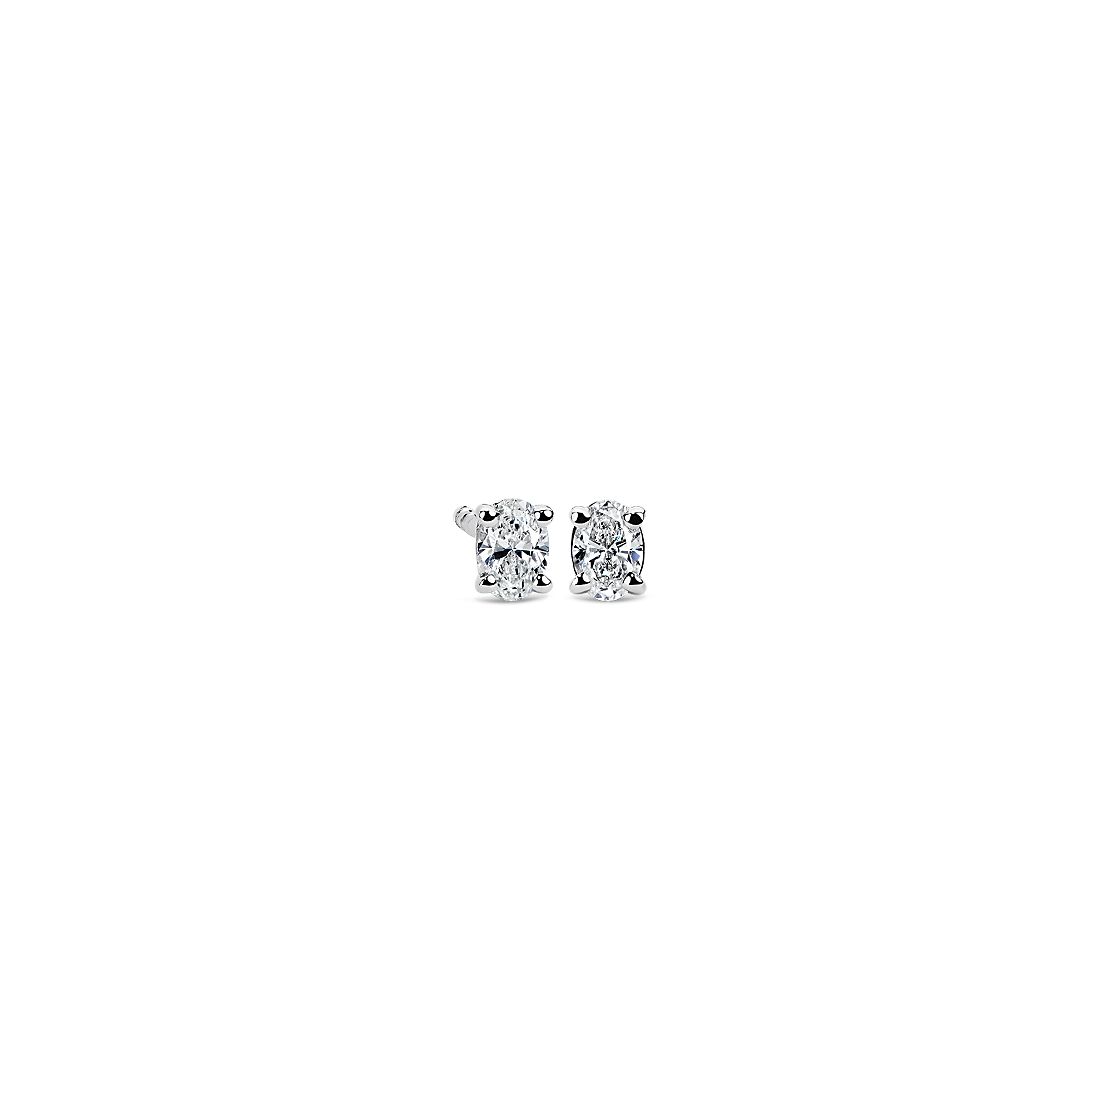 14k White Gold Four-Claw Oval Diamond Stud Earrings (0.23 ct. tw.)